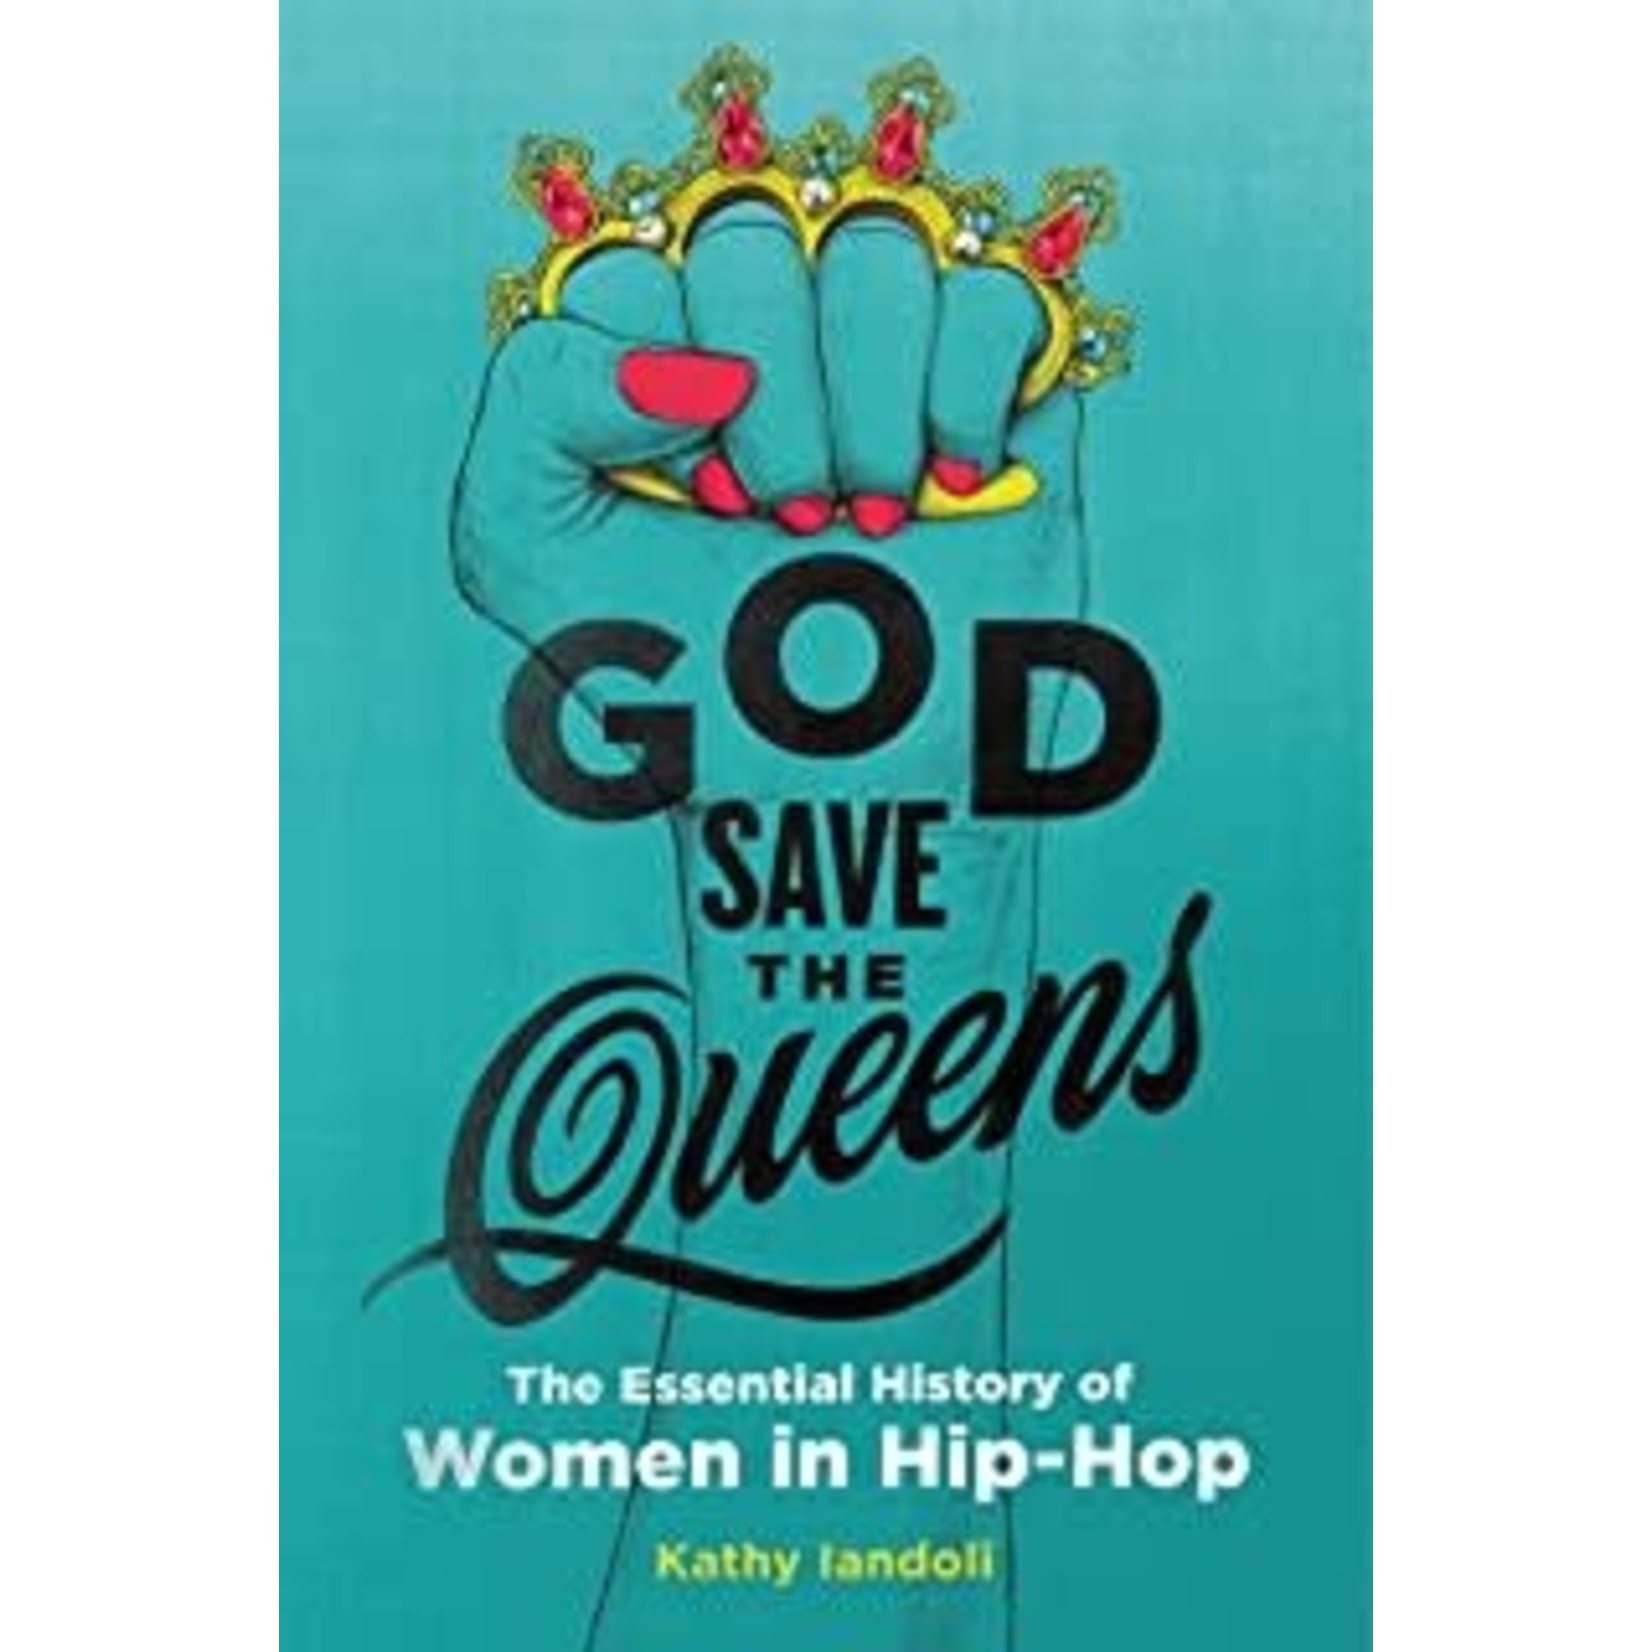 God Save The Queens: The Essential History Of Women In Hip-Hop [Book]